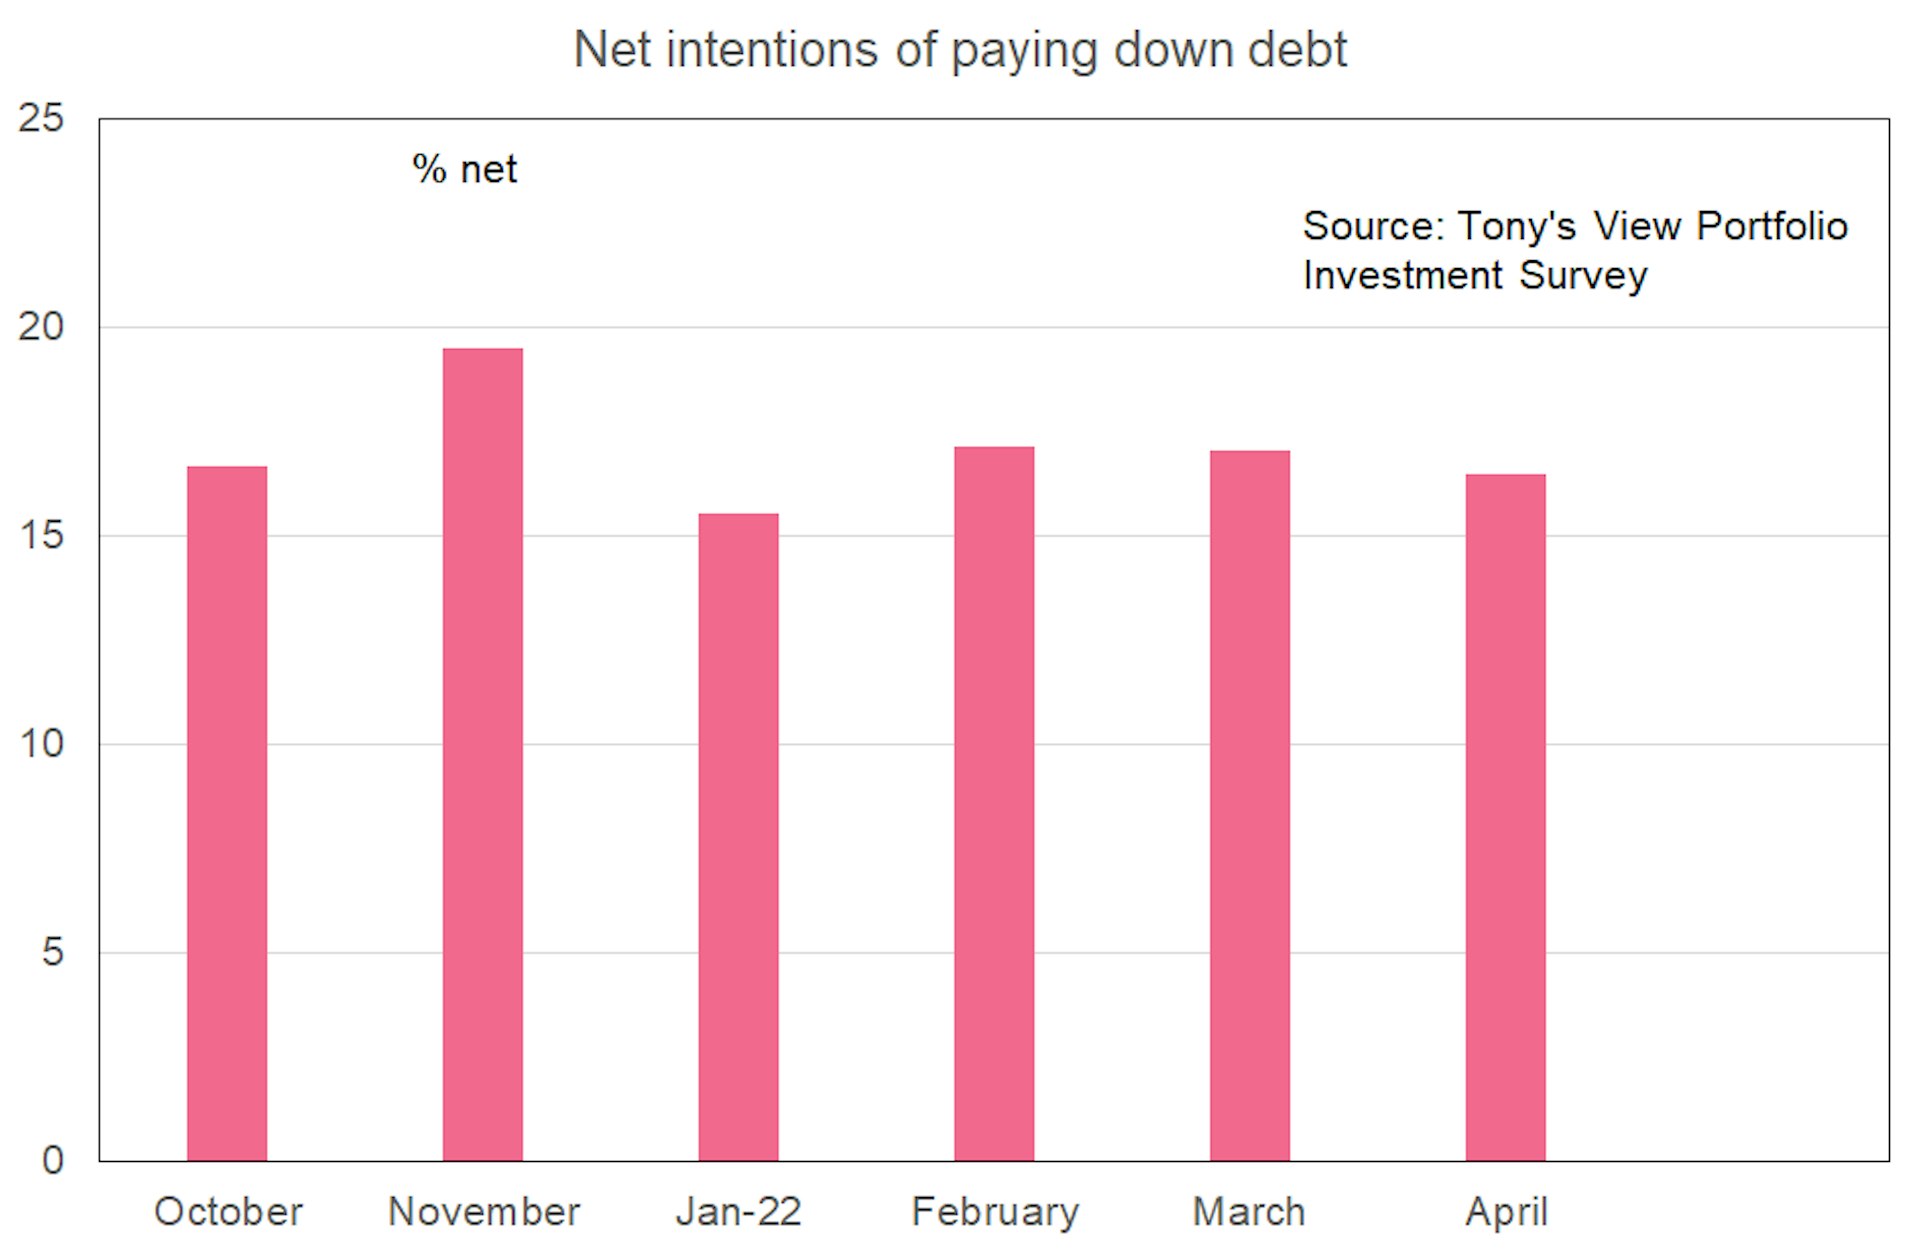 Bar graph showing net intentions of paying down debt remaining constant from around 16% in October 2021 to a similar 16% in April 2022. 